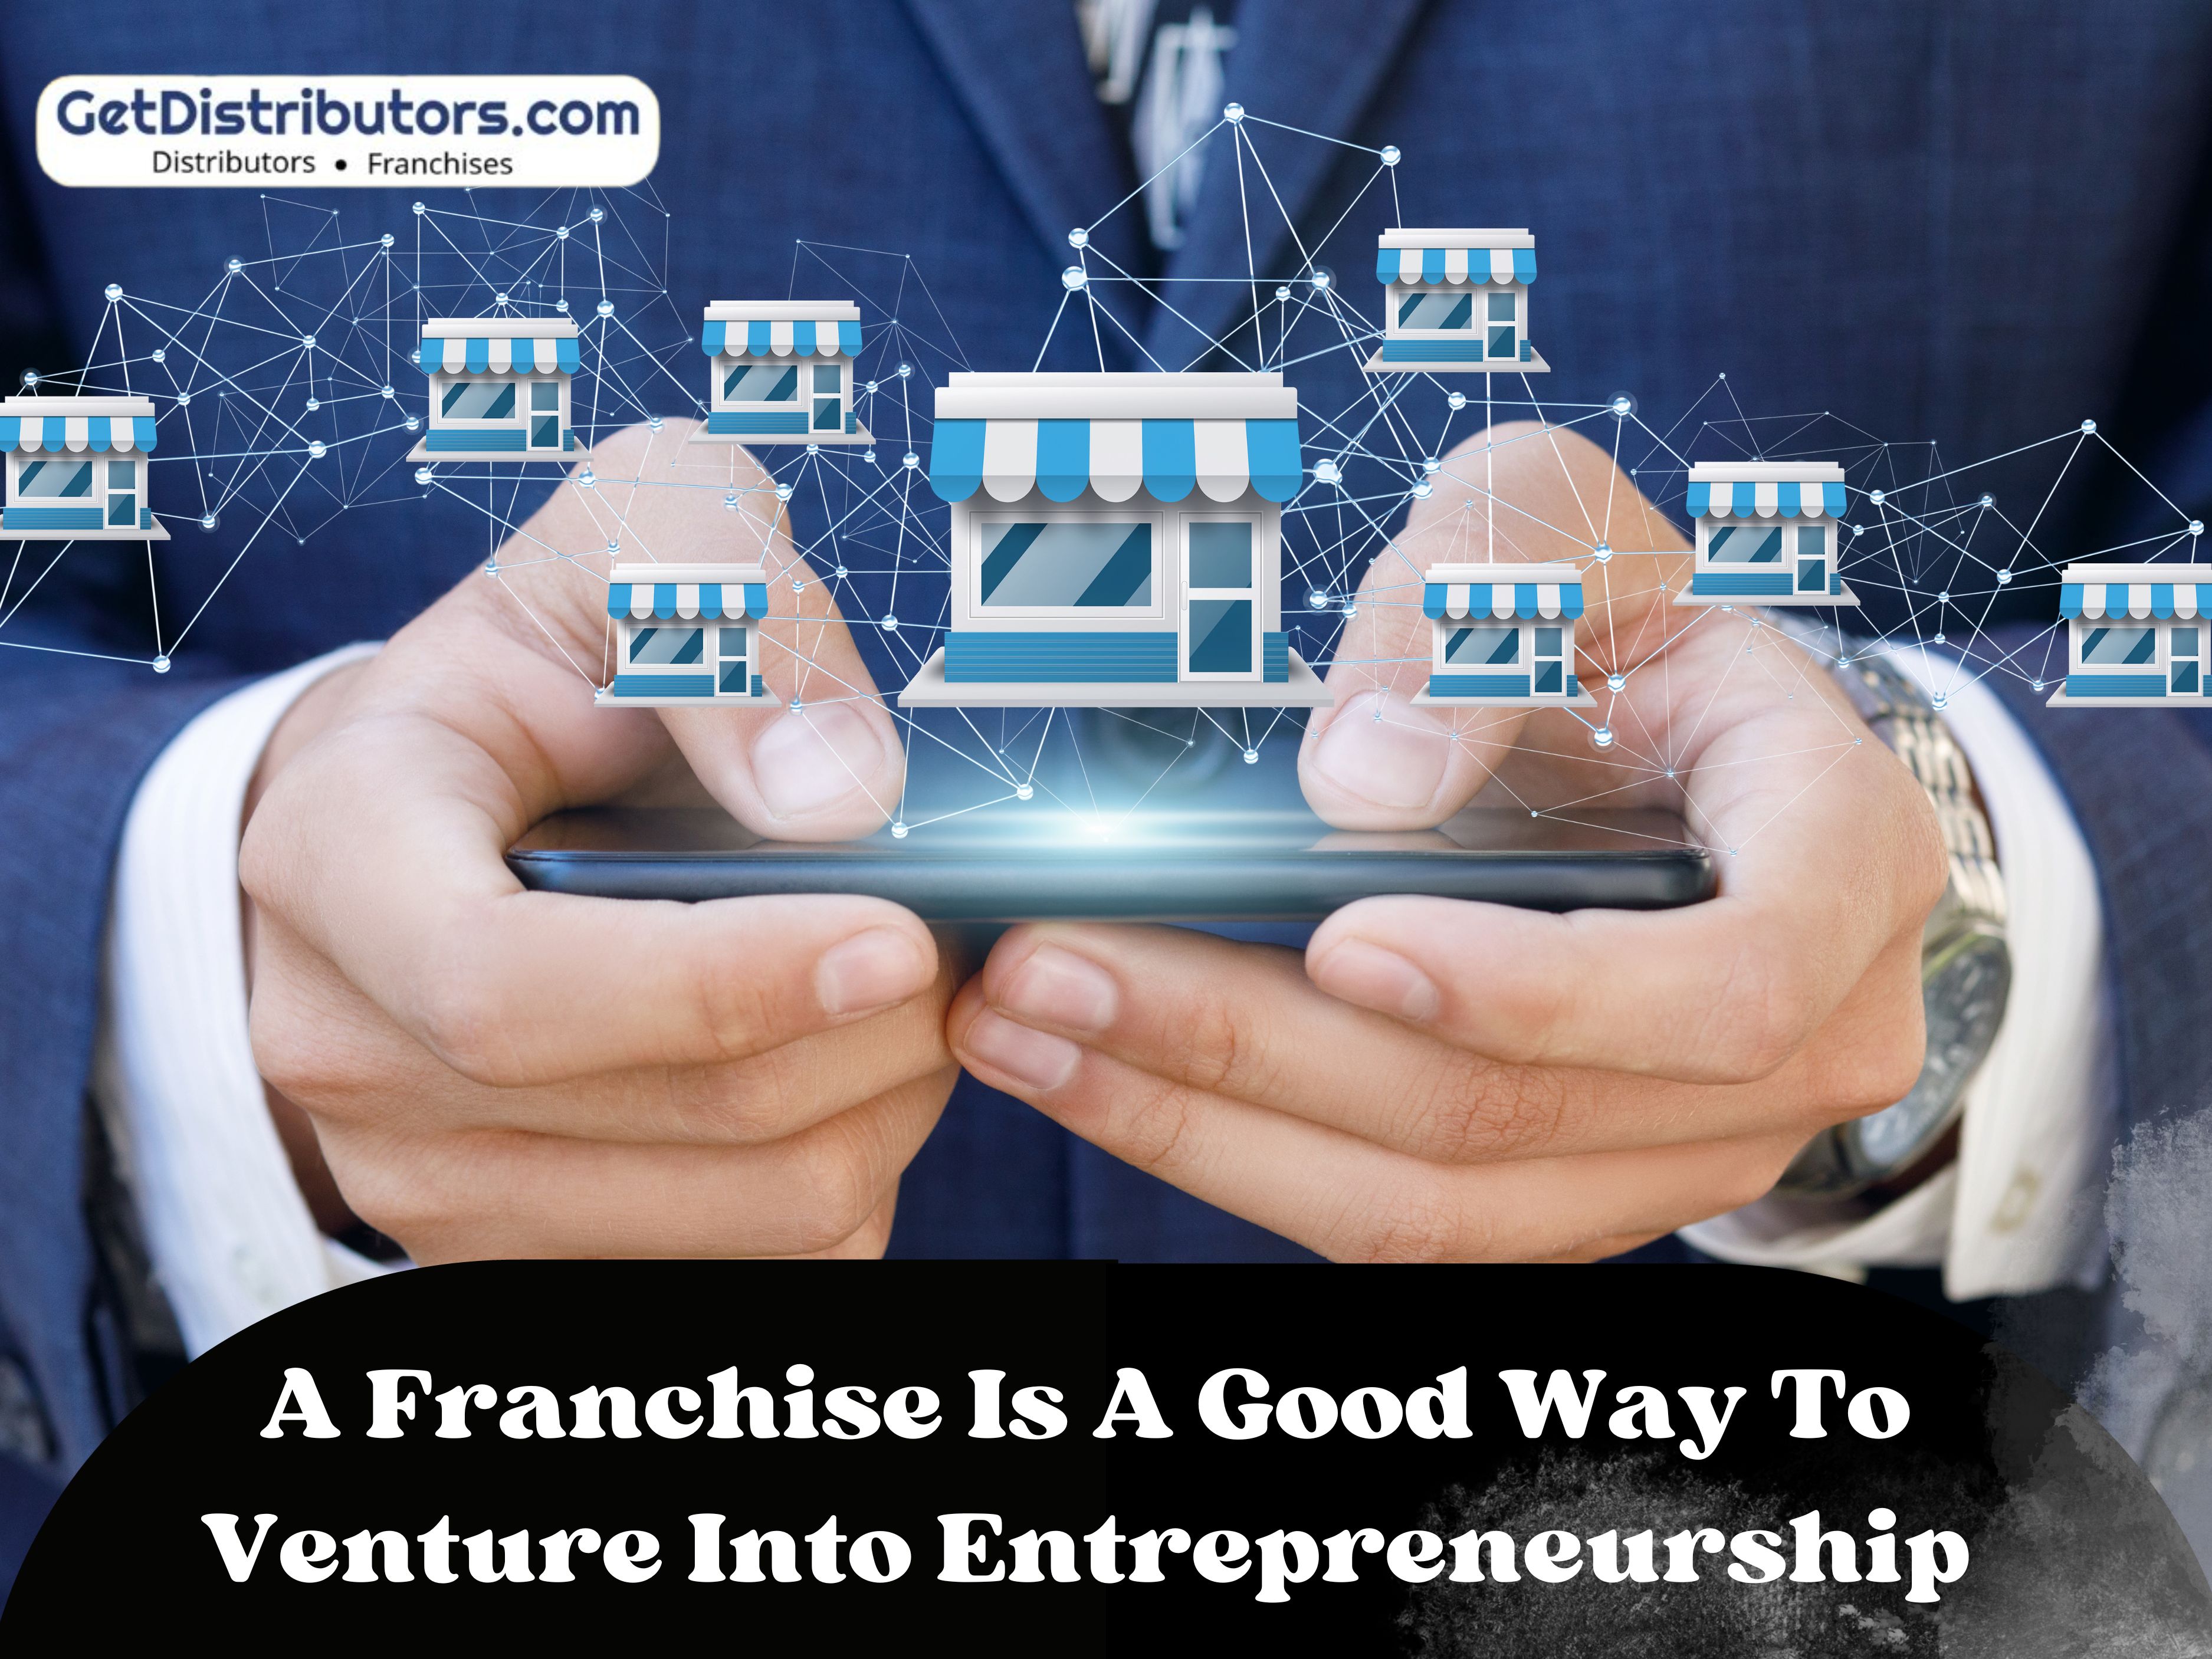 A Franchise Is A Good Way To Venture Into Entrepreneurship